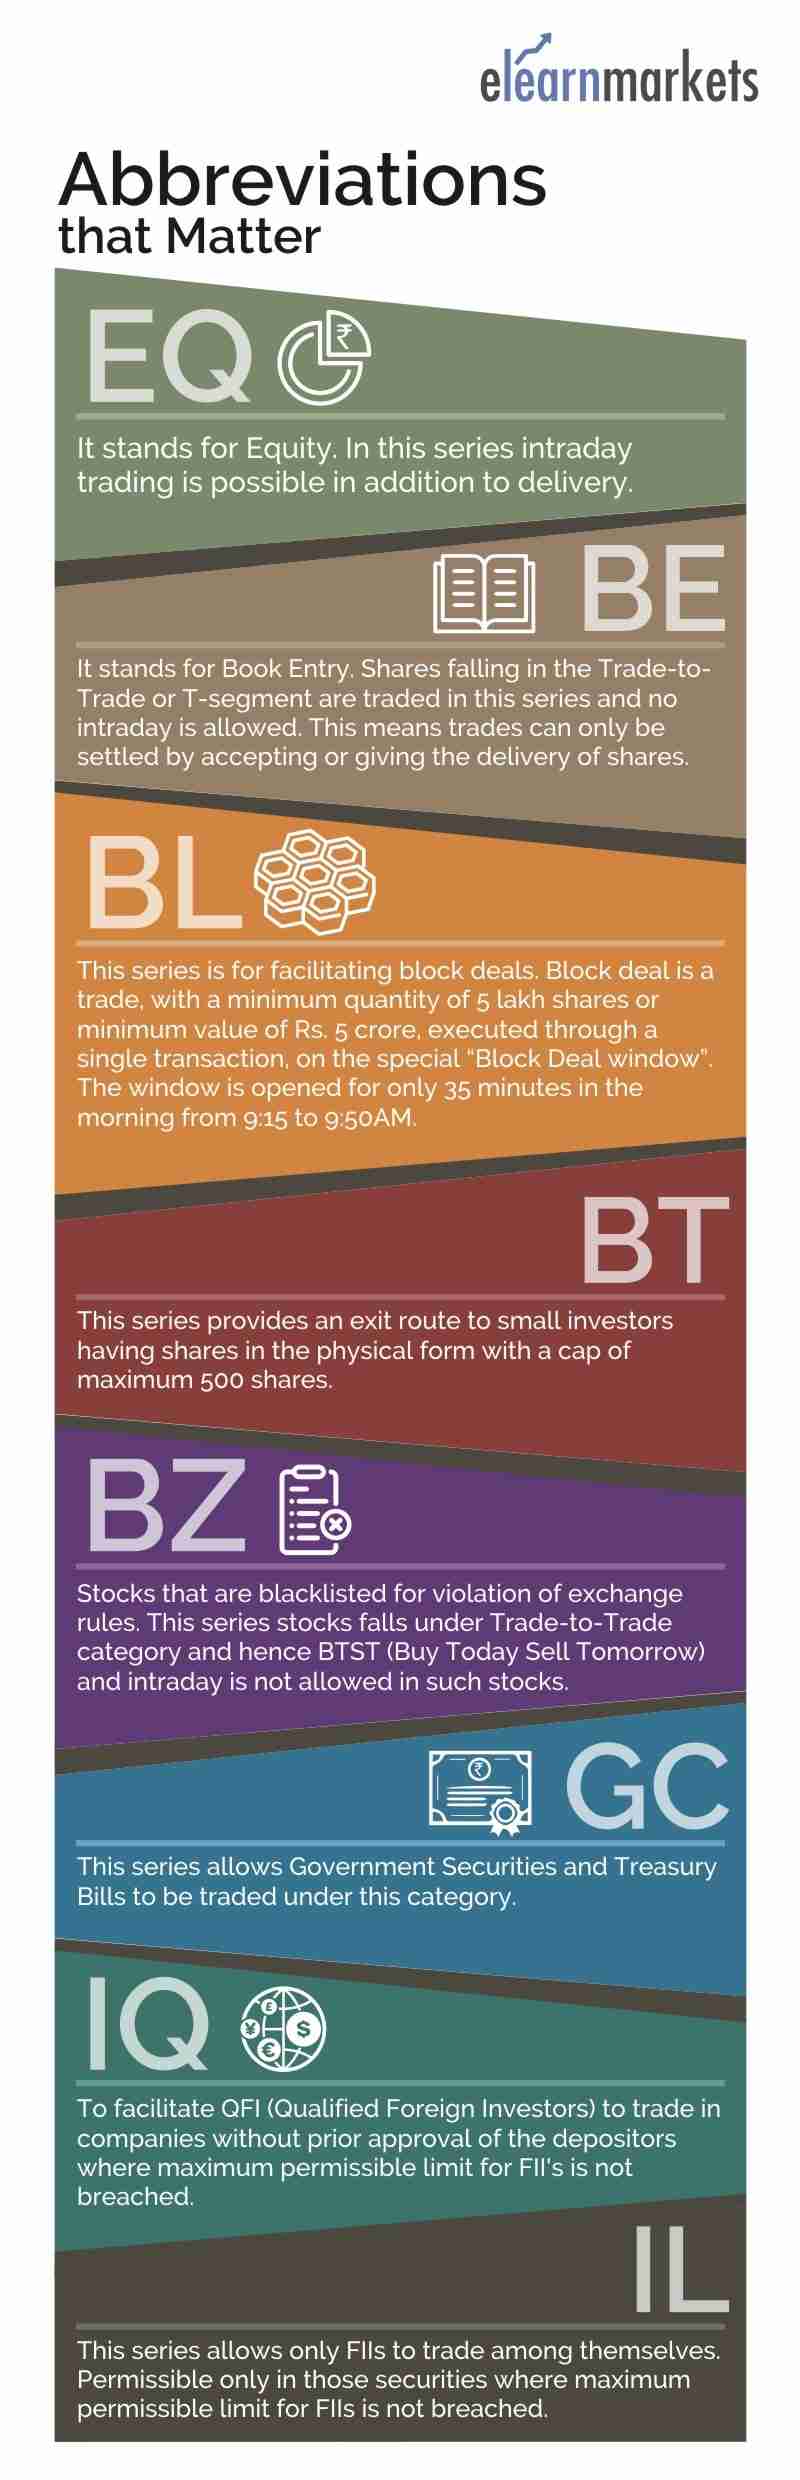 8 Stock Market Abbreviations to know